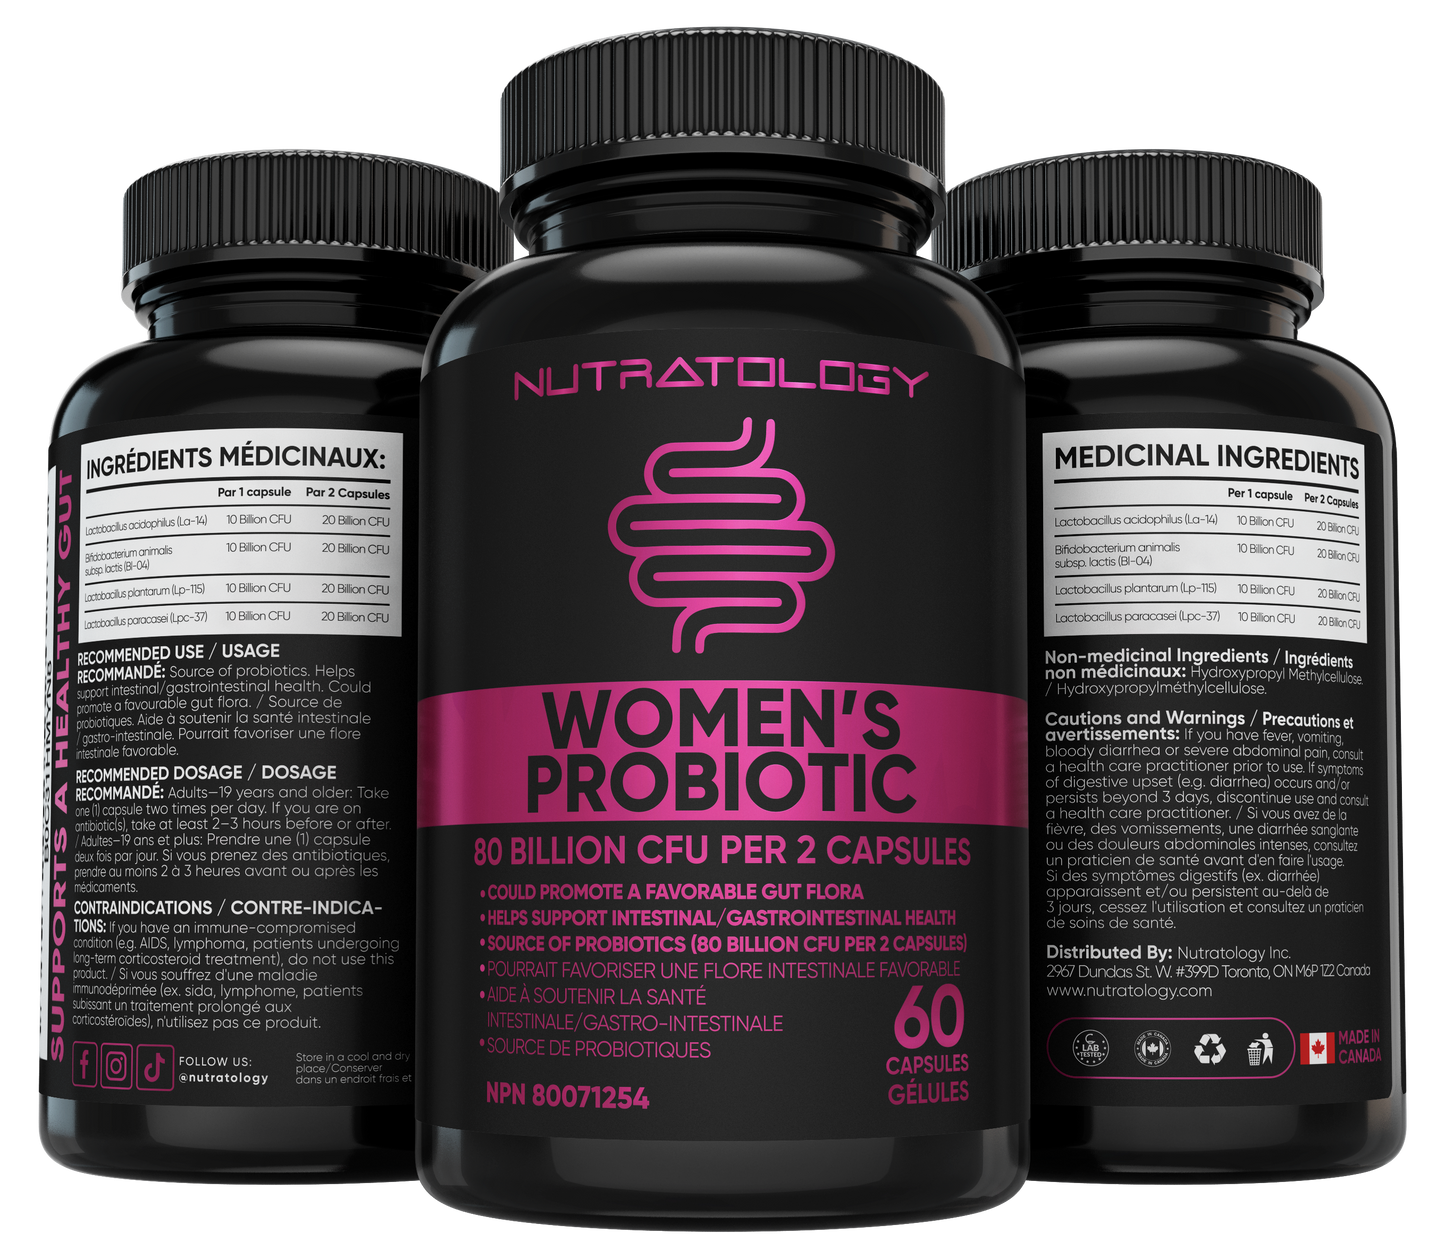 Nutratology Women's Probiotic - 60 Capsules